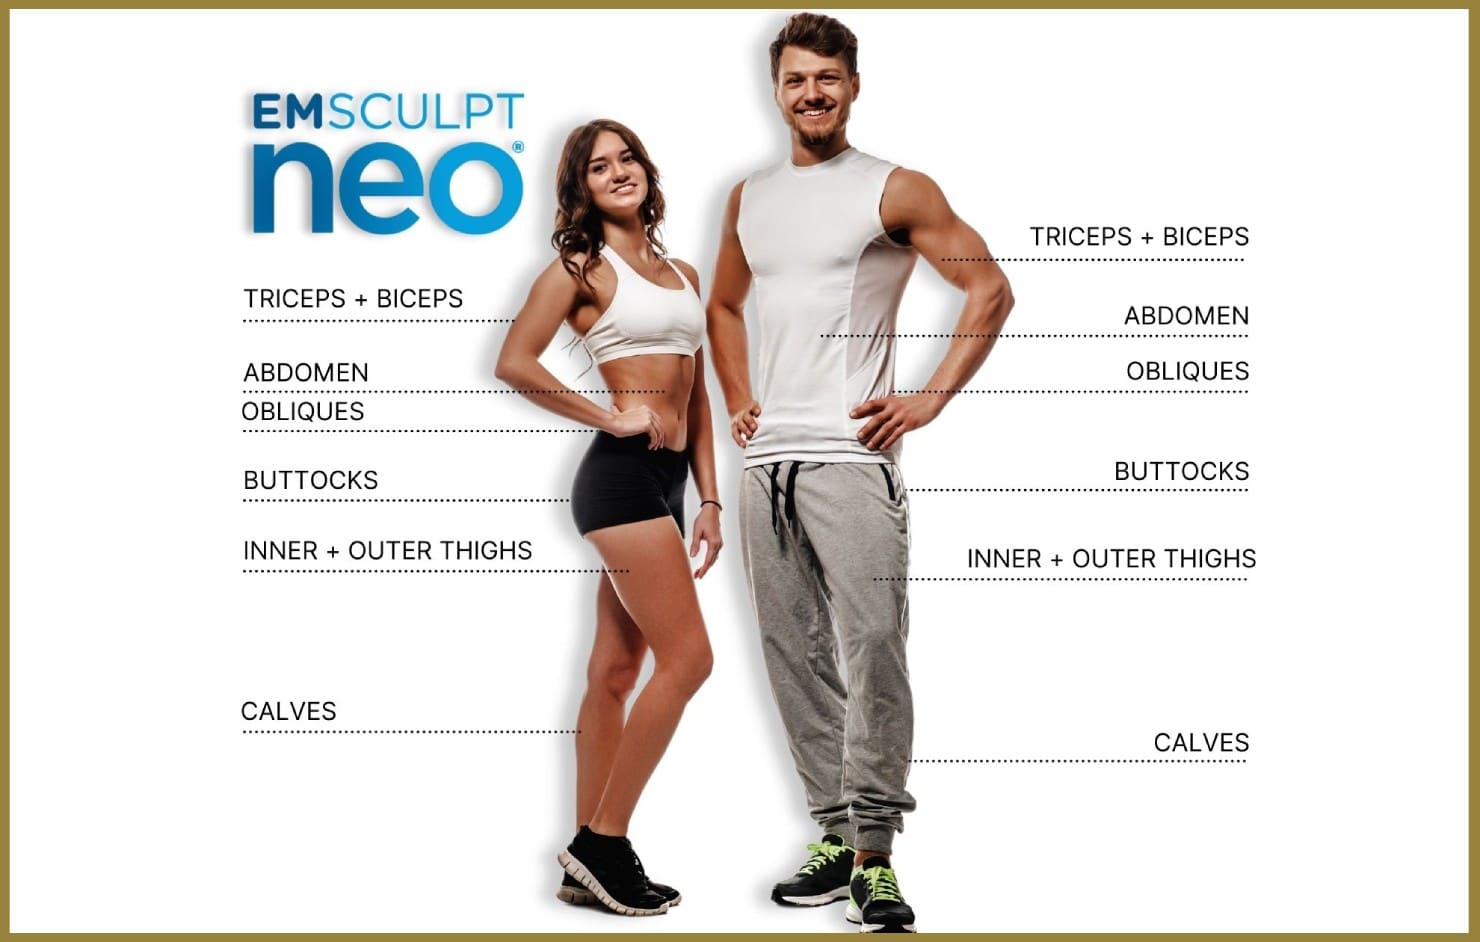 Man and woman posed together showing the treatable areas with Emsculpt NEO.